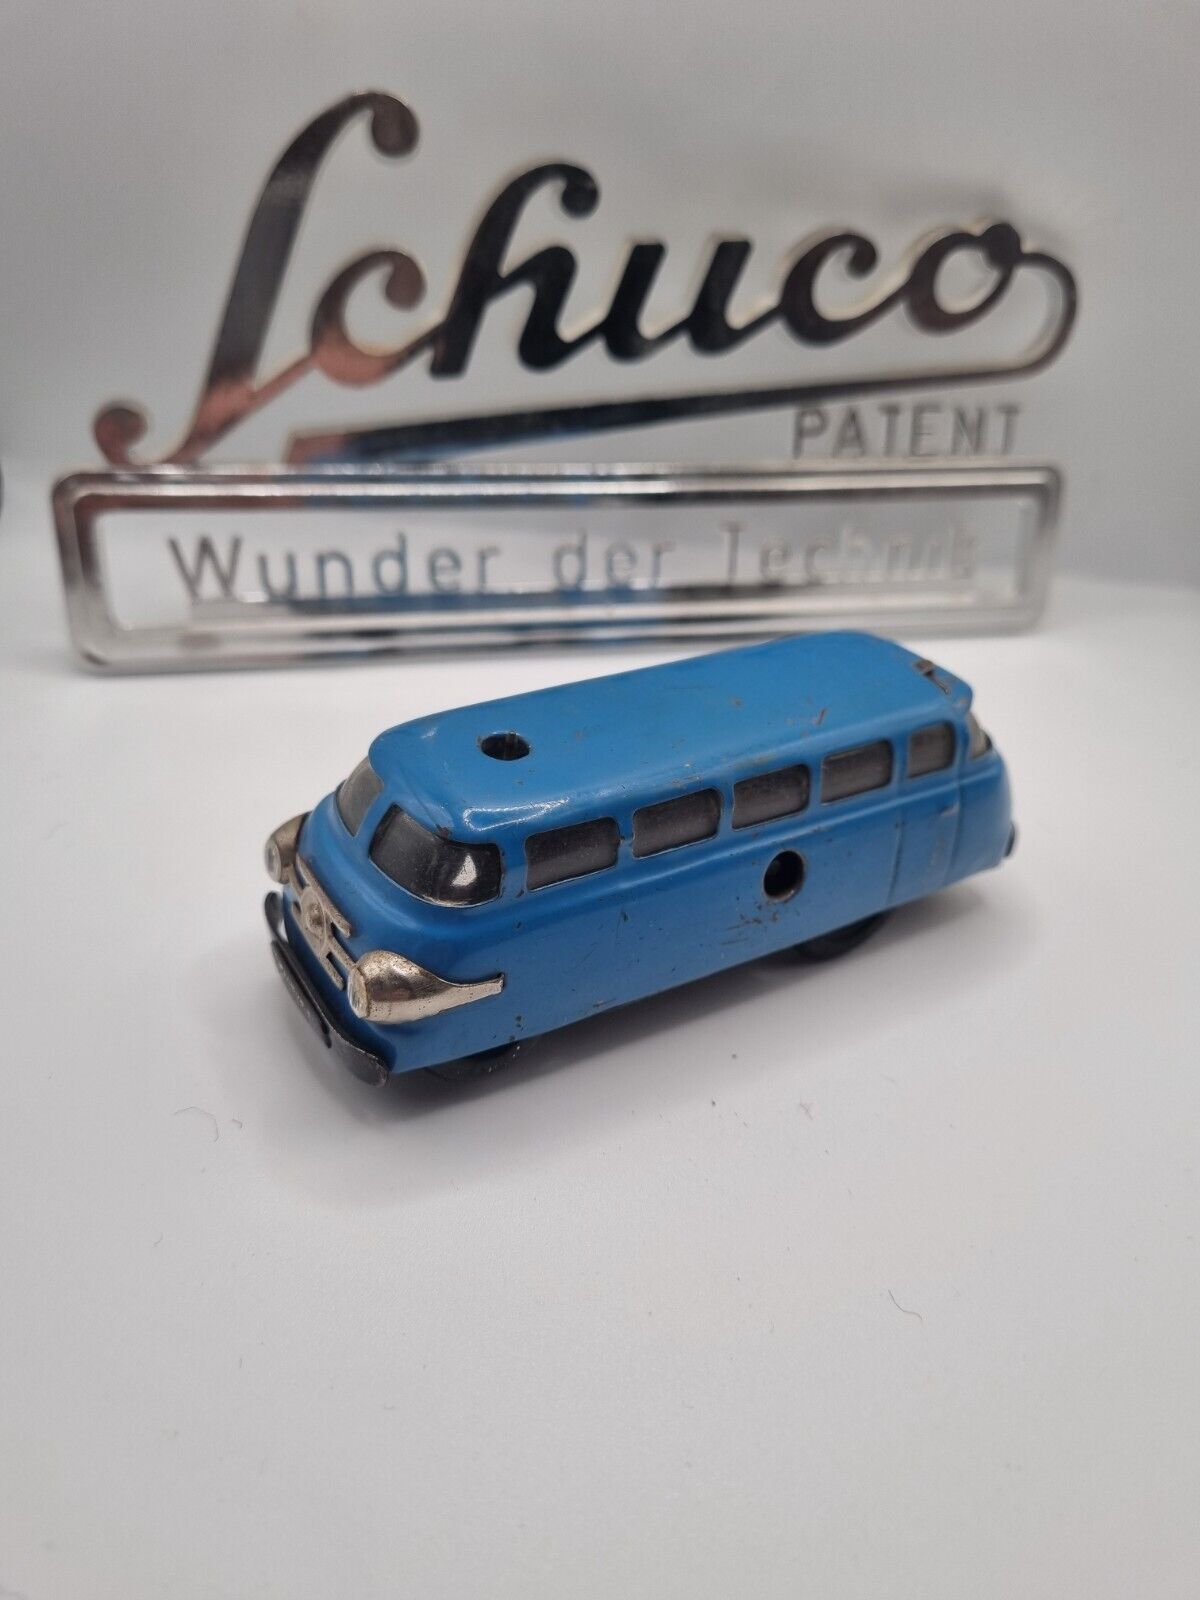 SCHUCO VARIANTO BUS 3044 MADE IN WESTERN GERMANY FUNCTIONAL